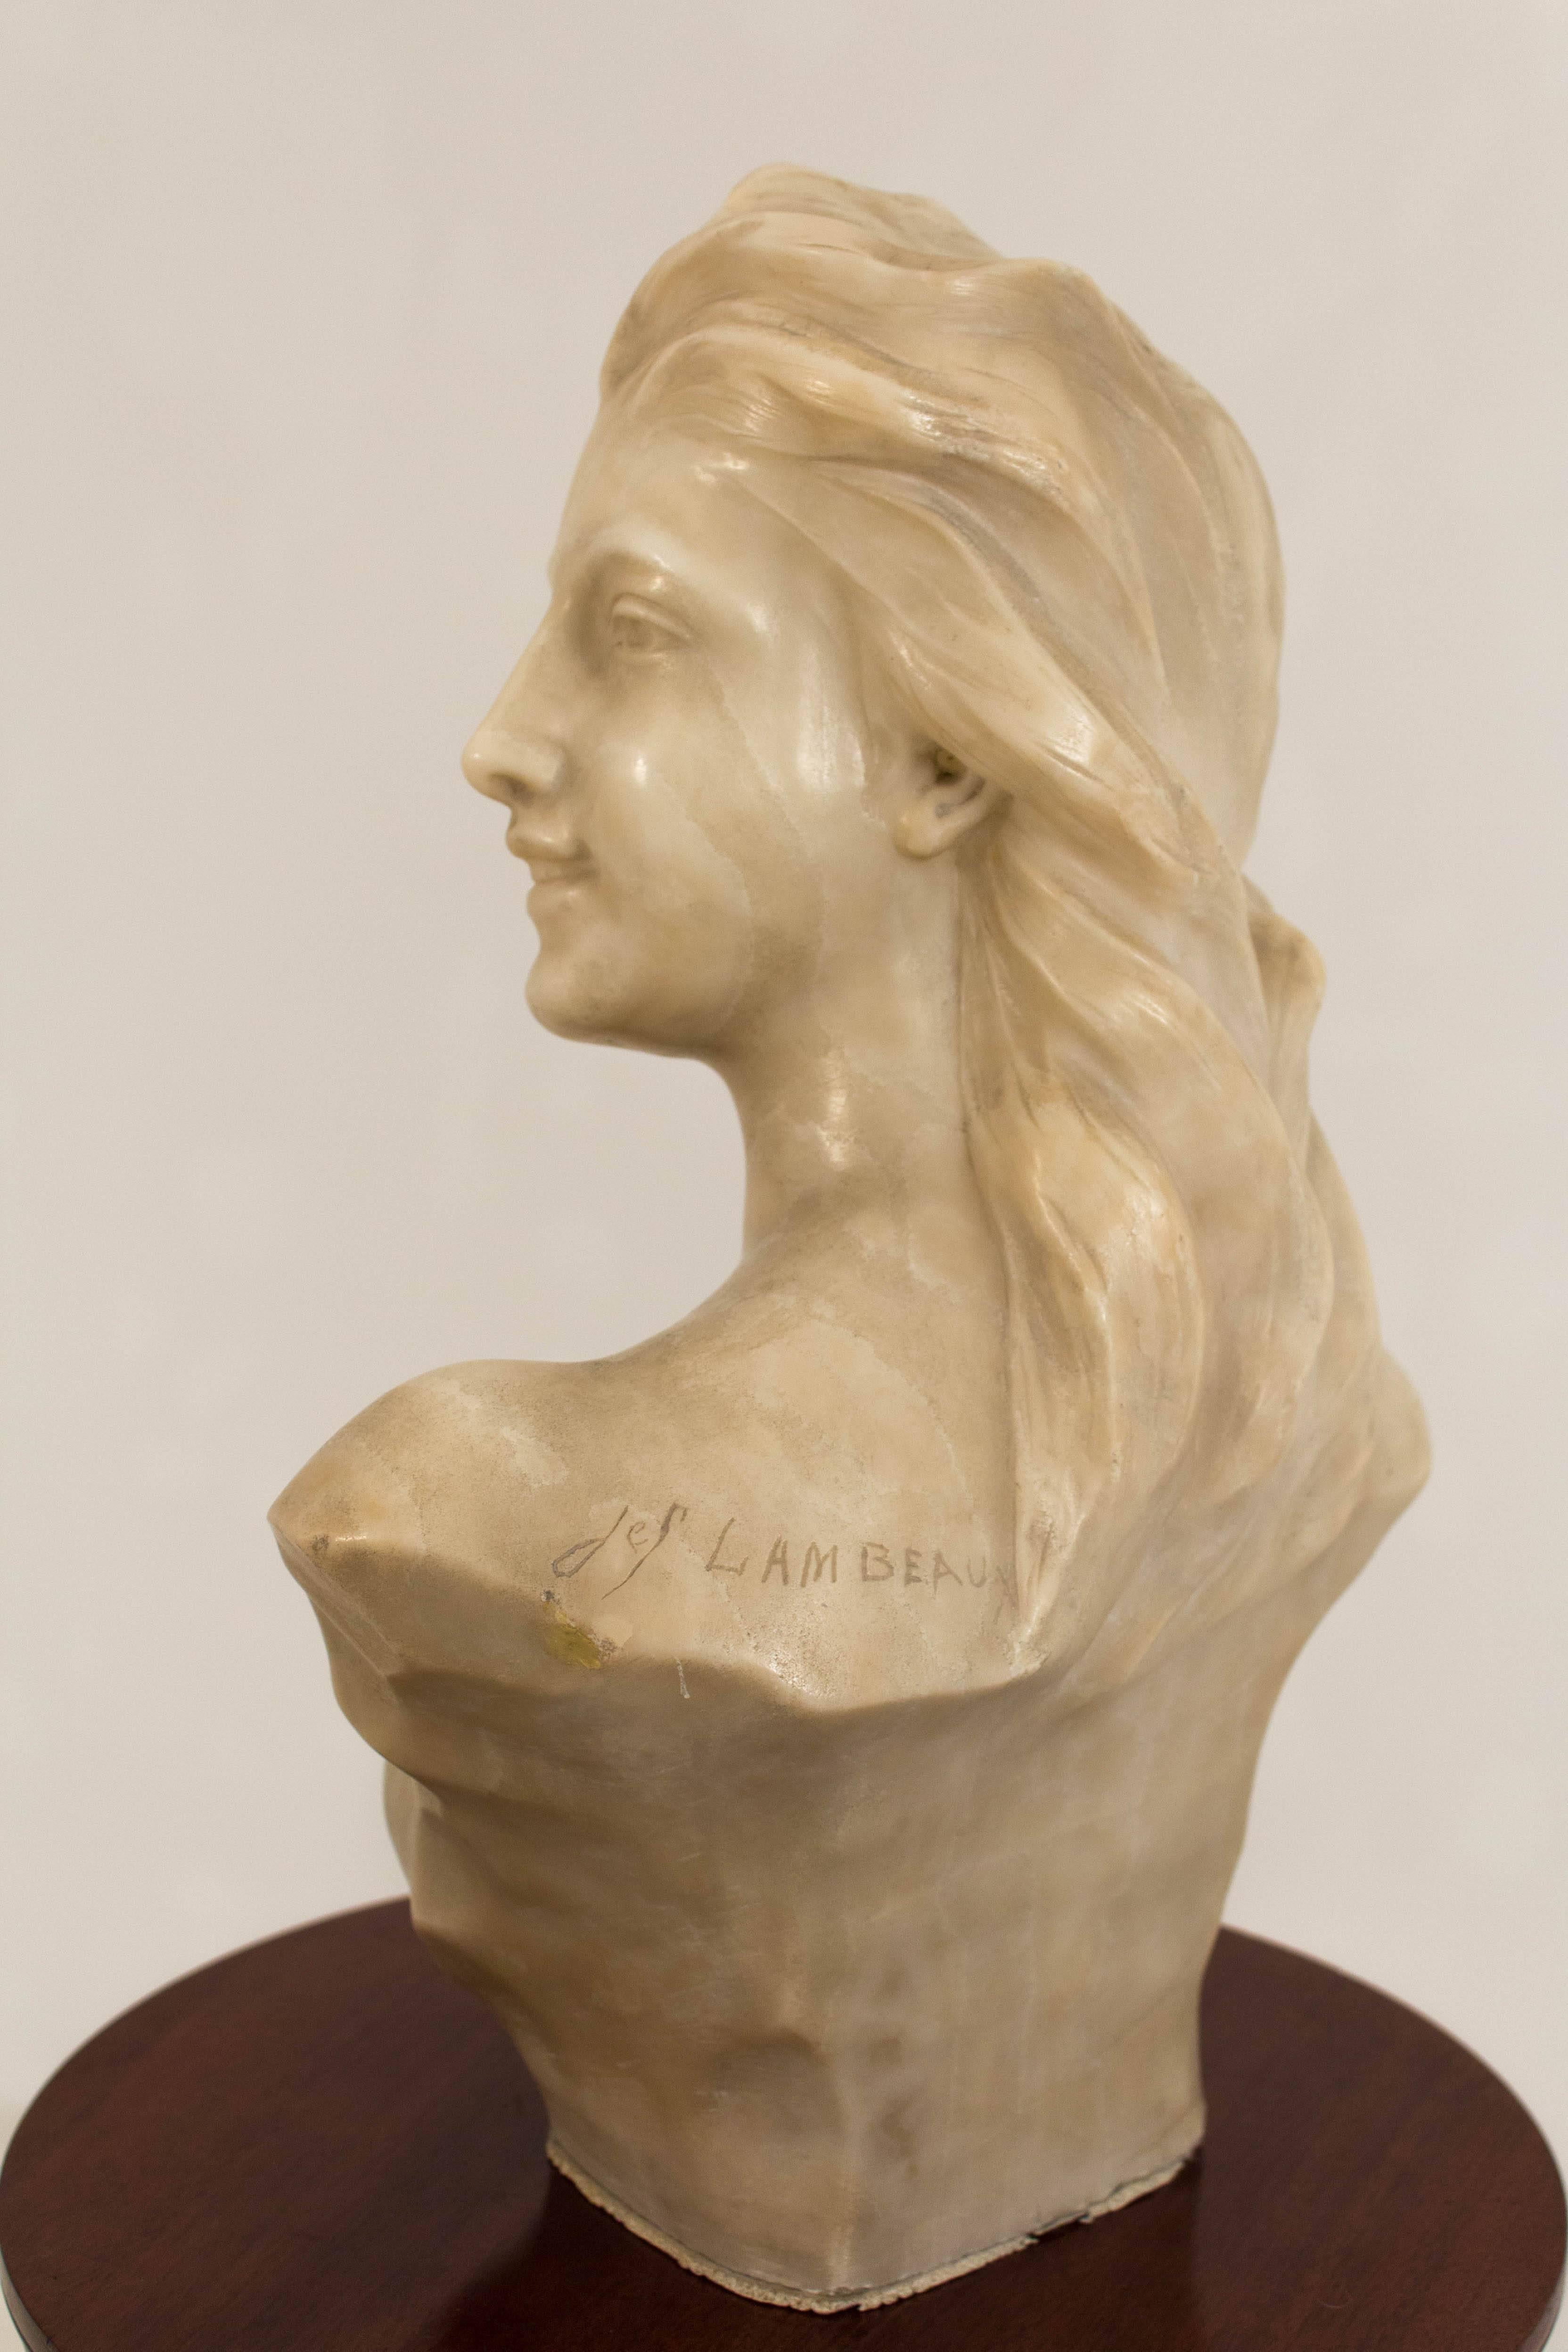 Stunning Art Nouveau Bust of Young Lady by Jef Lambeaux 1